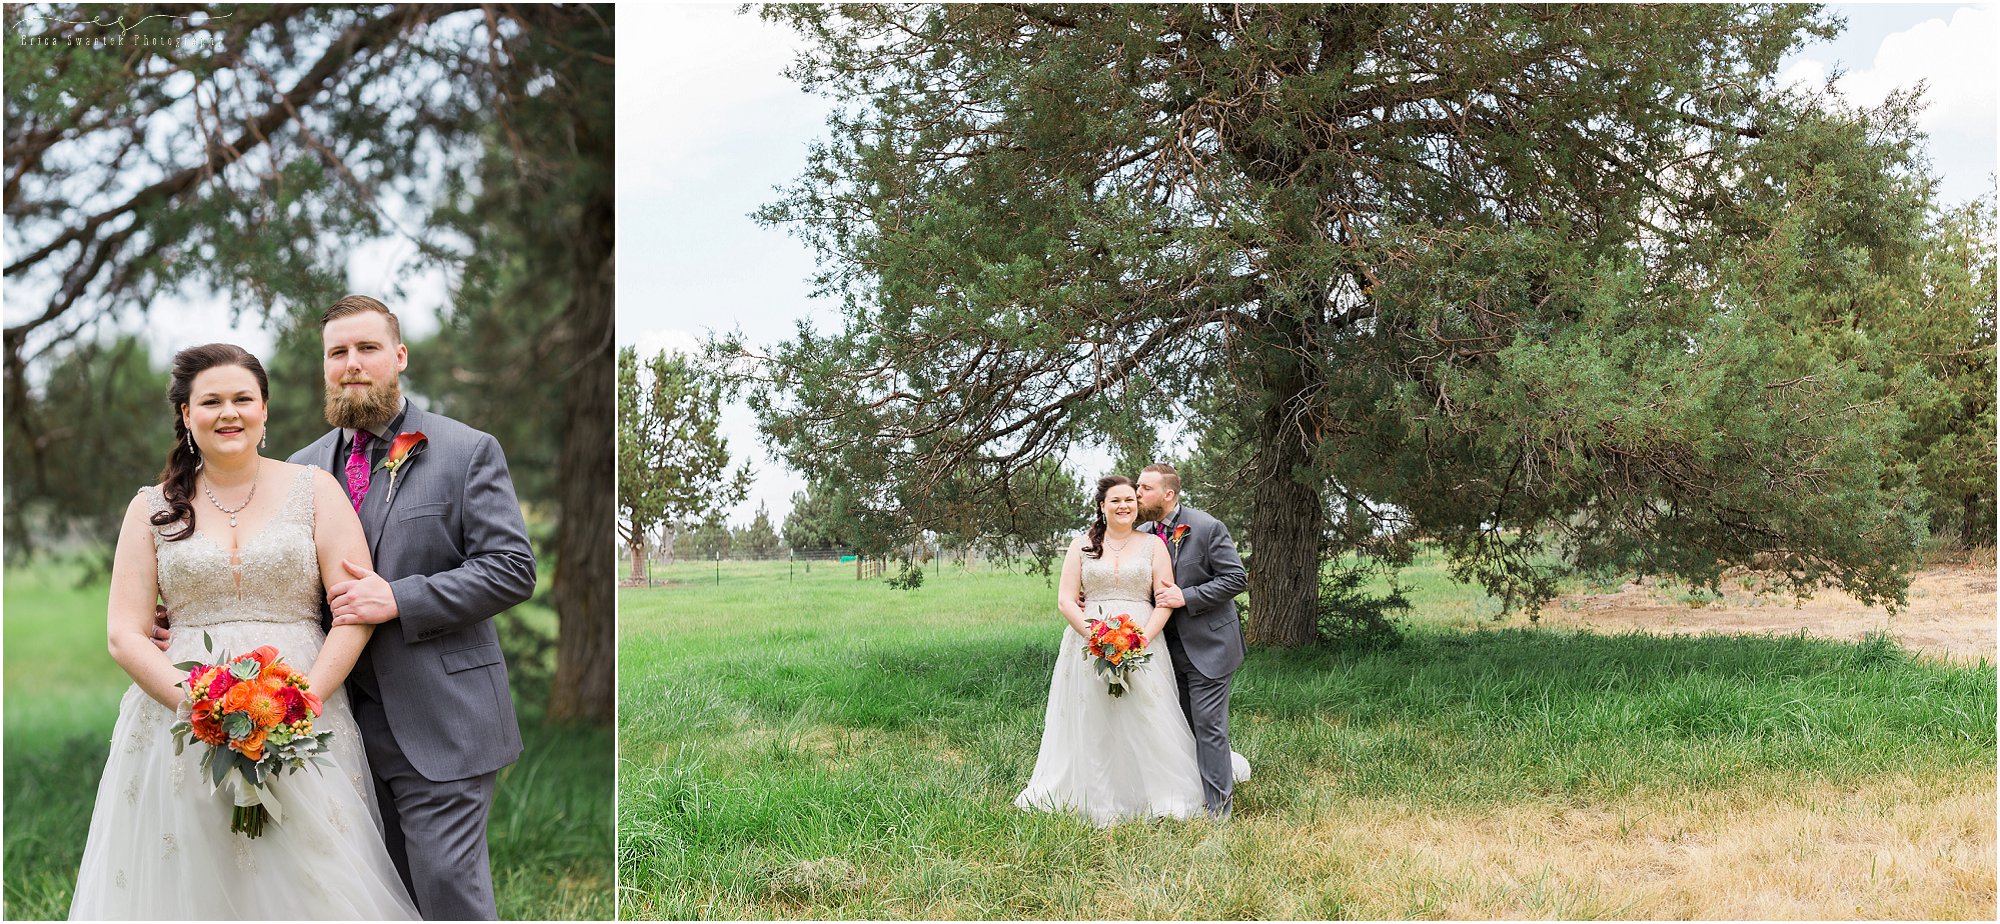 A few photos in the high desert landscape surrounding Bend before heading to the falls for their intimate Oregon waterfall wedding. | Erica Swantek Photography